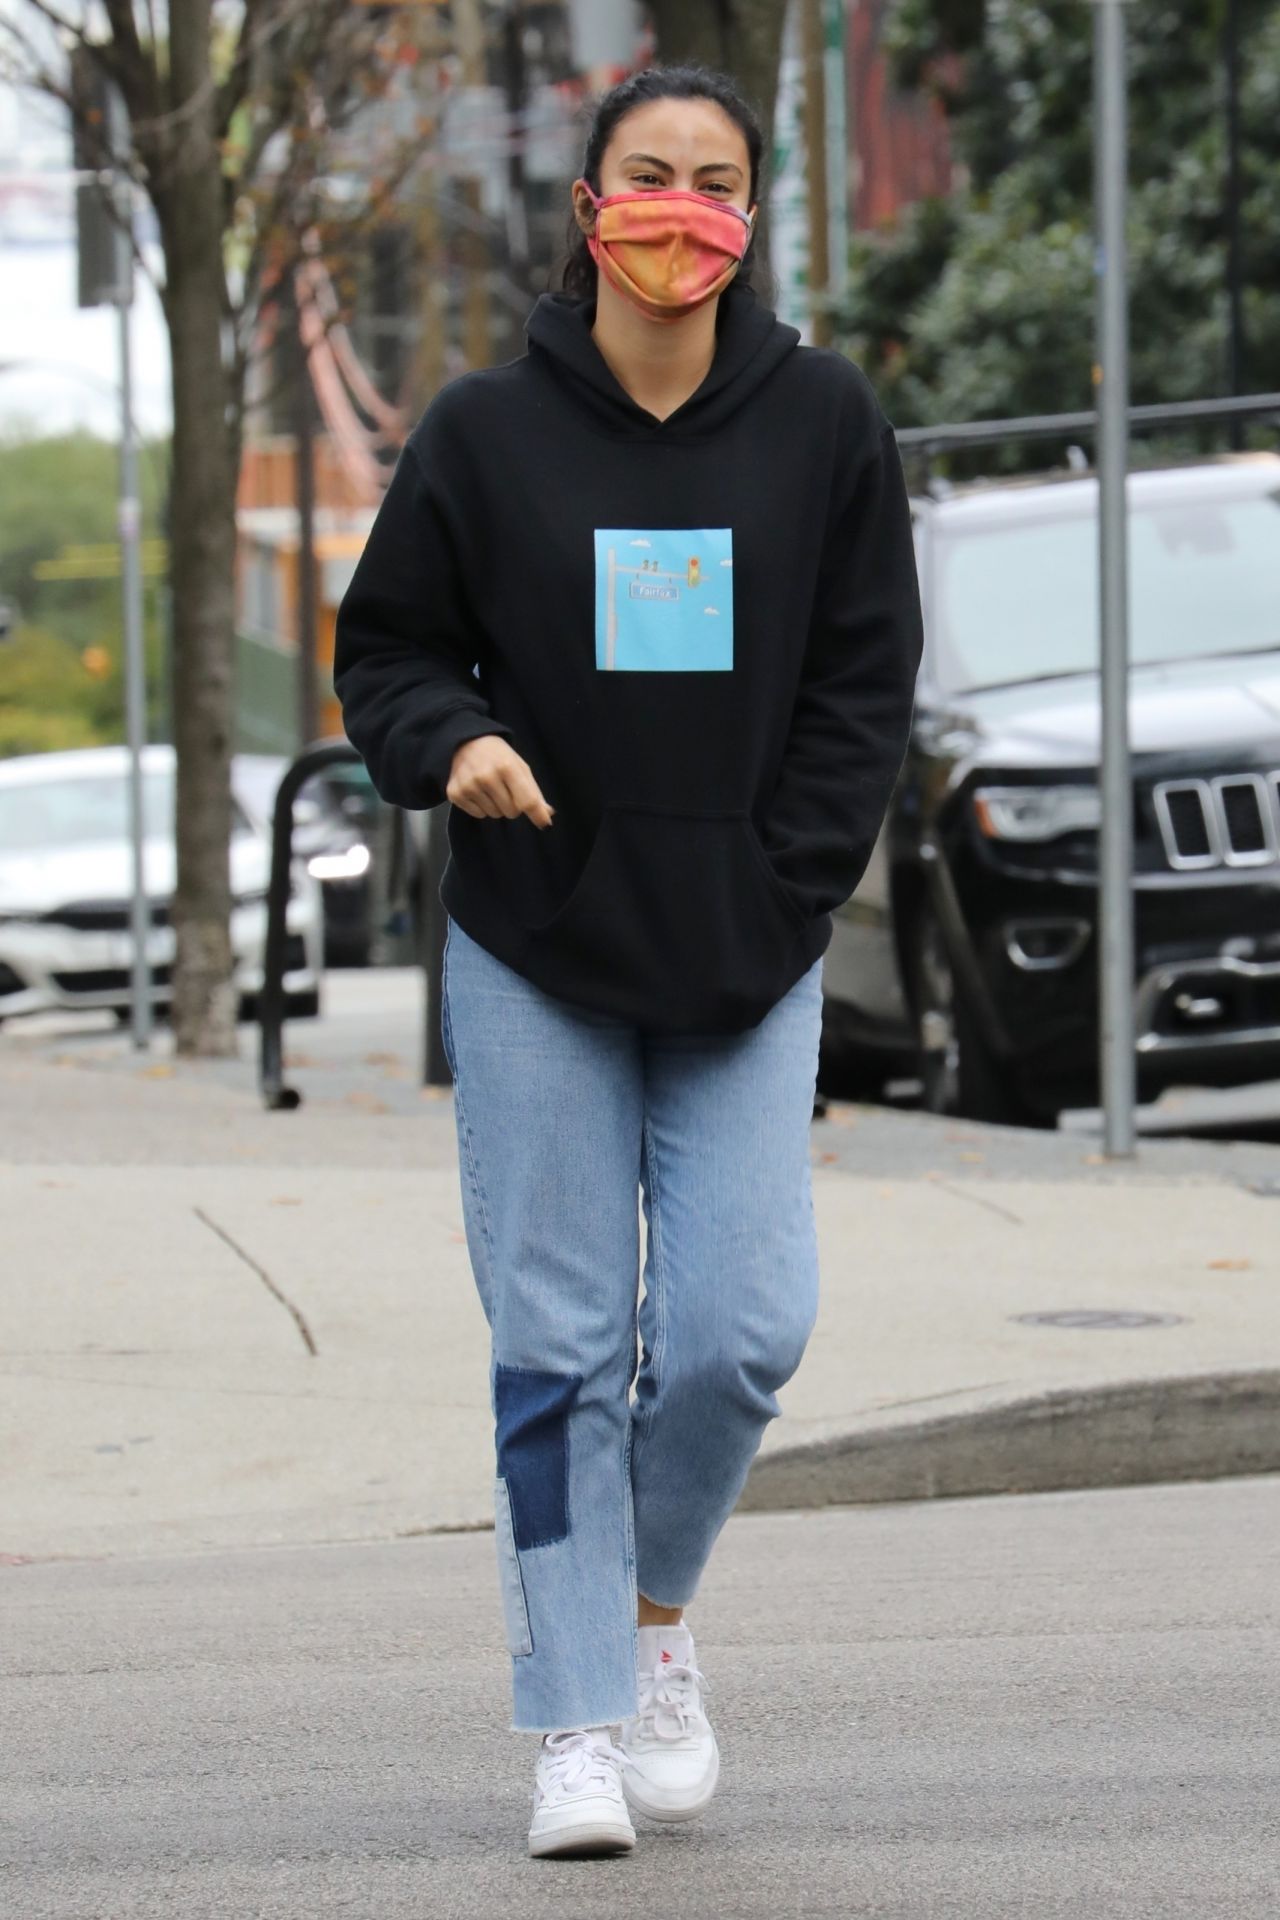 camila-mendes-out-in-vancouver-10-17-2020-6.jpg